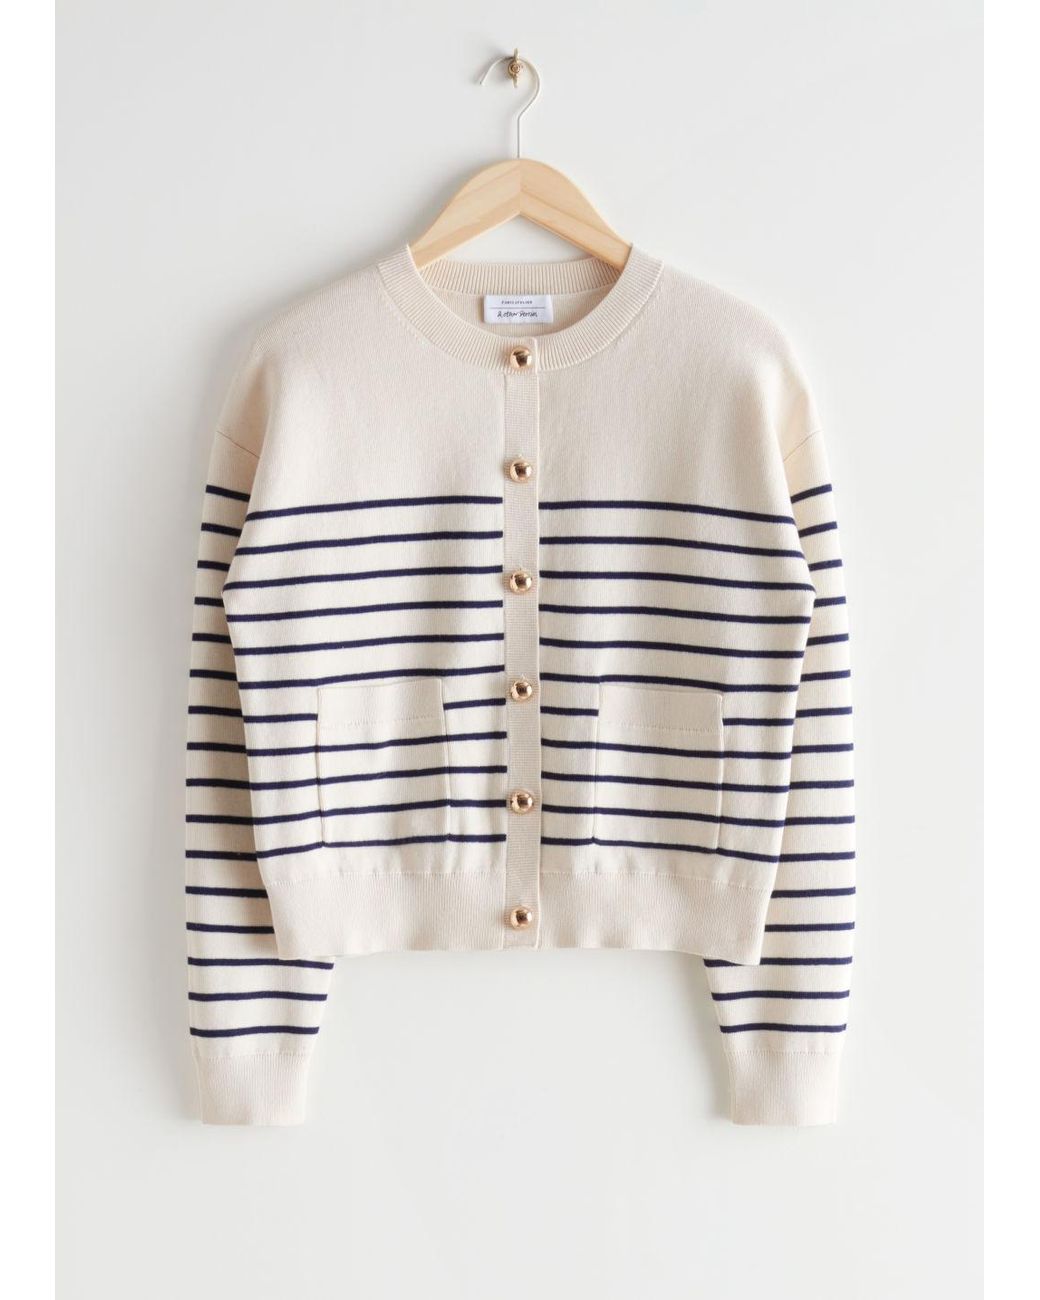 & Other Stories Striped Gold Button Cardigan in White | Lyst